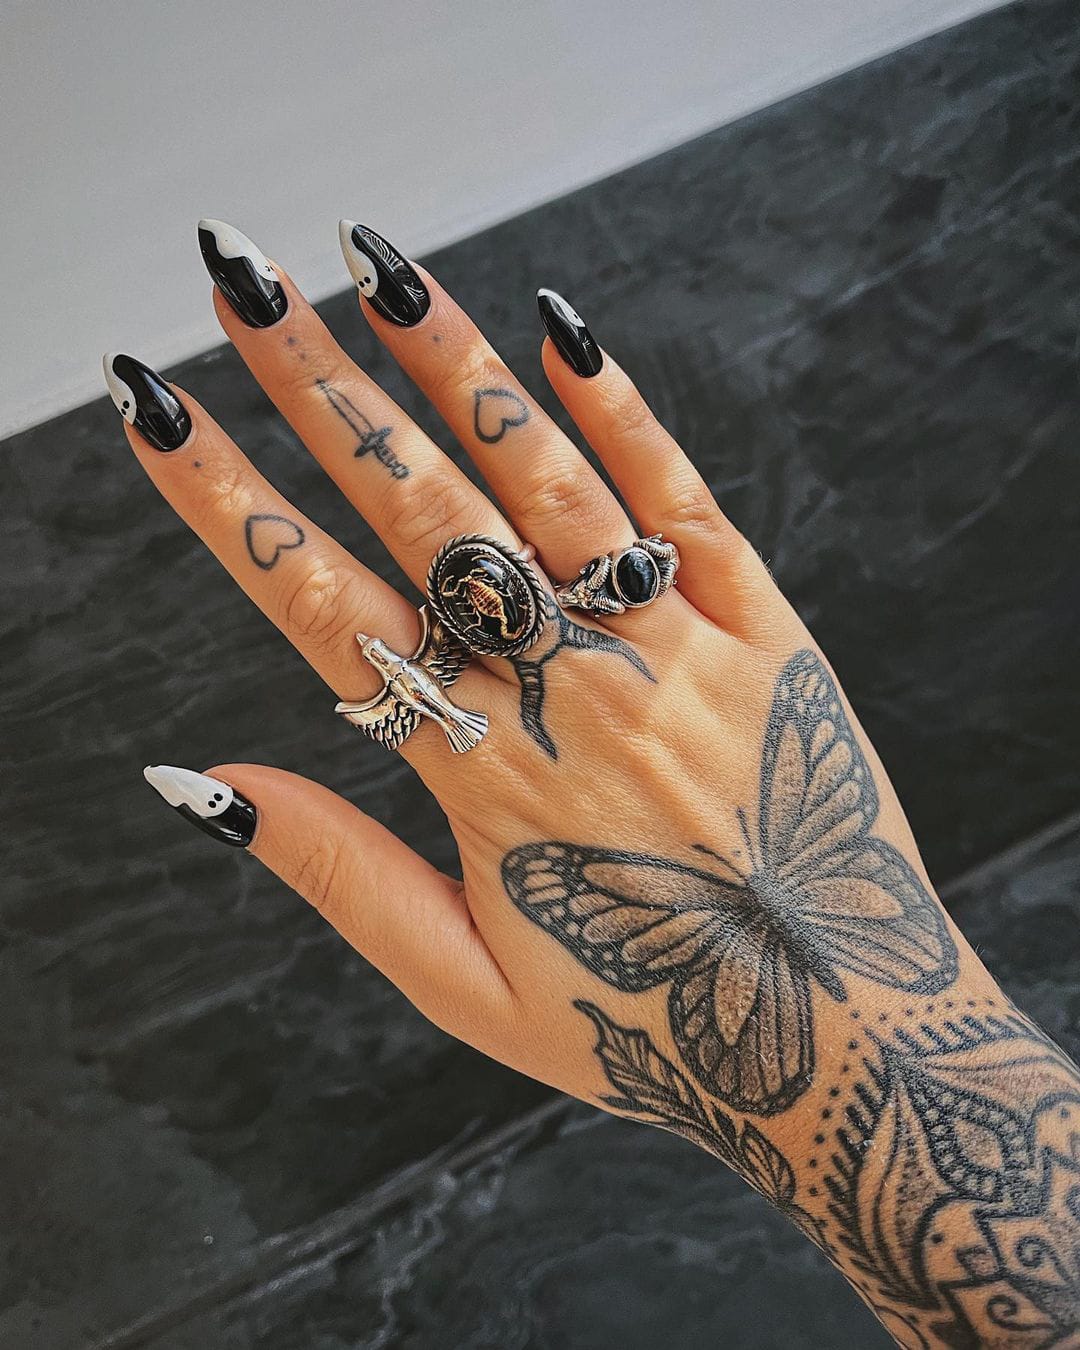 14 Finger Tattoo Ideas To Replace Your Ring Collection  Inside Out